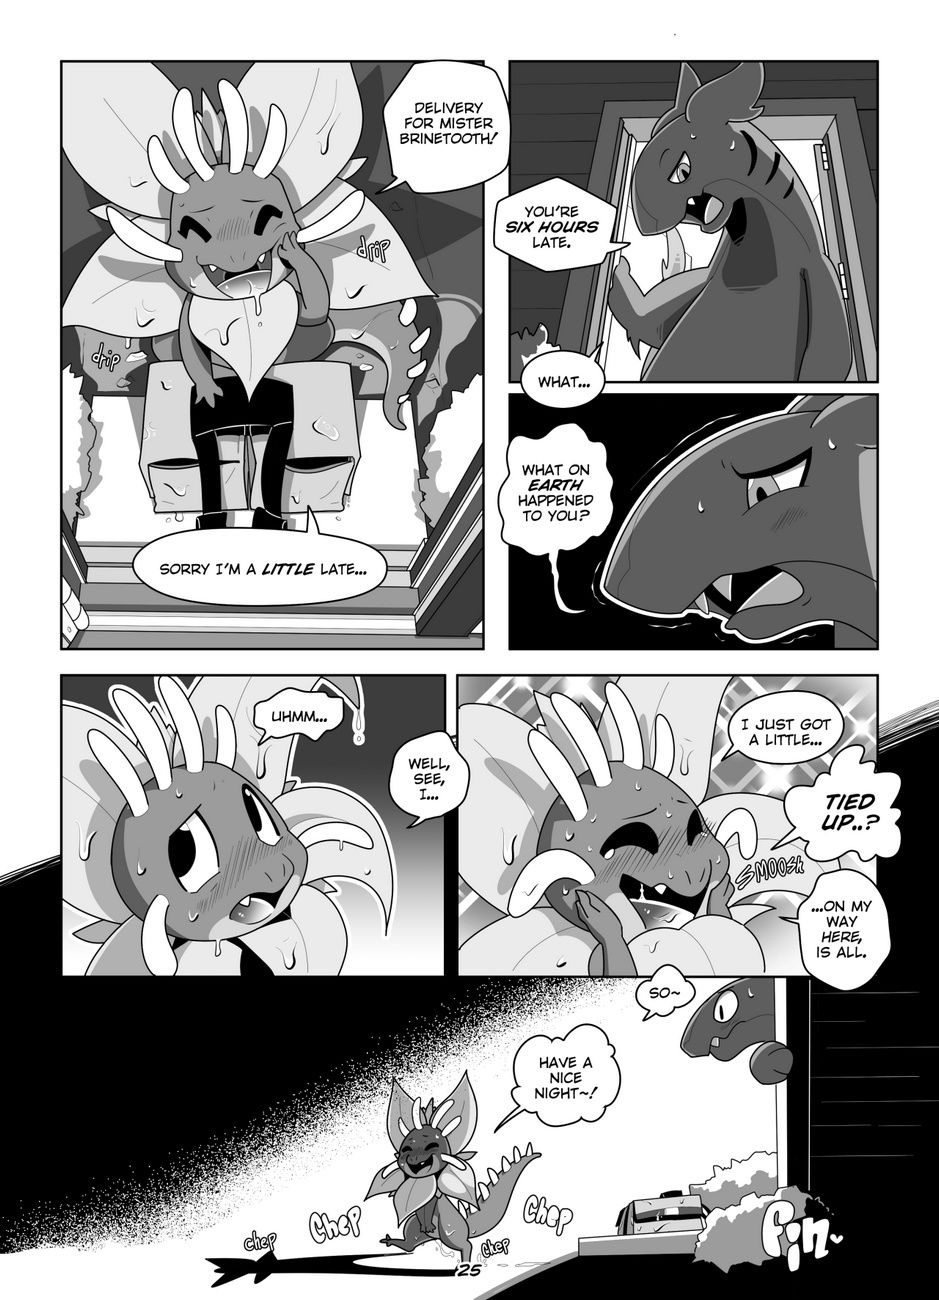 Knotted Wood - part 2 page 1